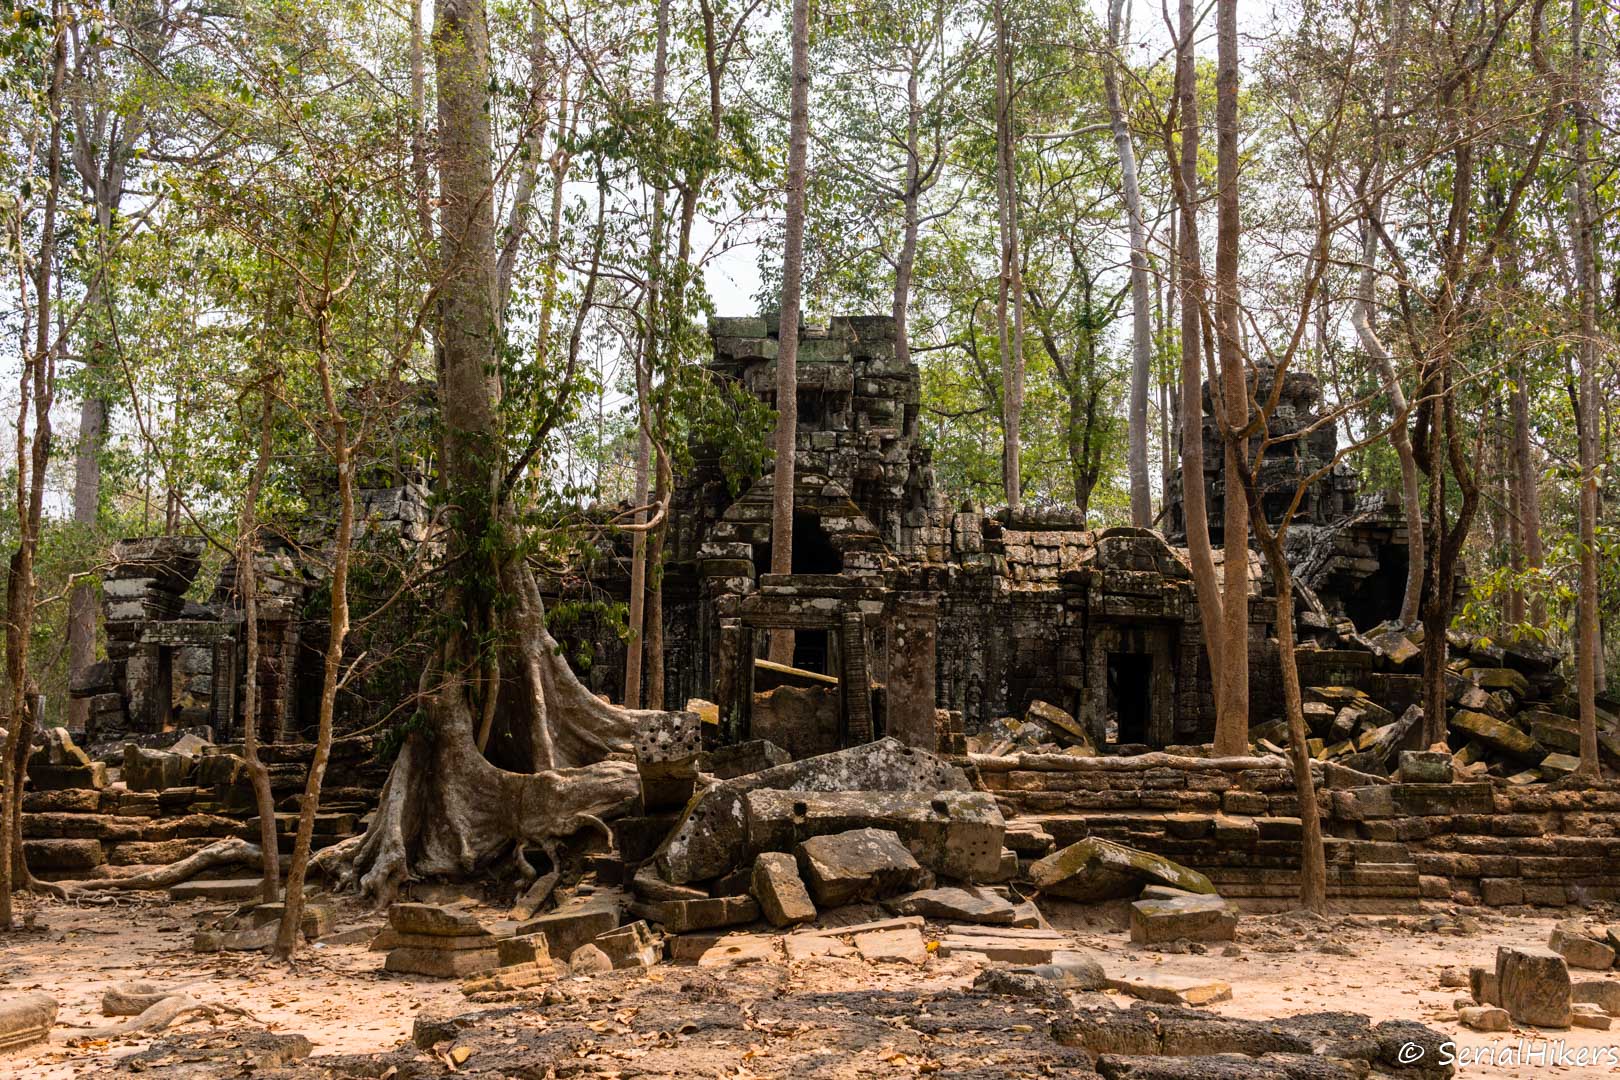 SerialHikers - Alternative Travel Blog SerialHikers - Engaged Travel & Without Flight Angkor Temples: a visit on one-day ticket and a bicycle - Cambodia Cambodia, South East Asia Heritage